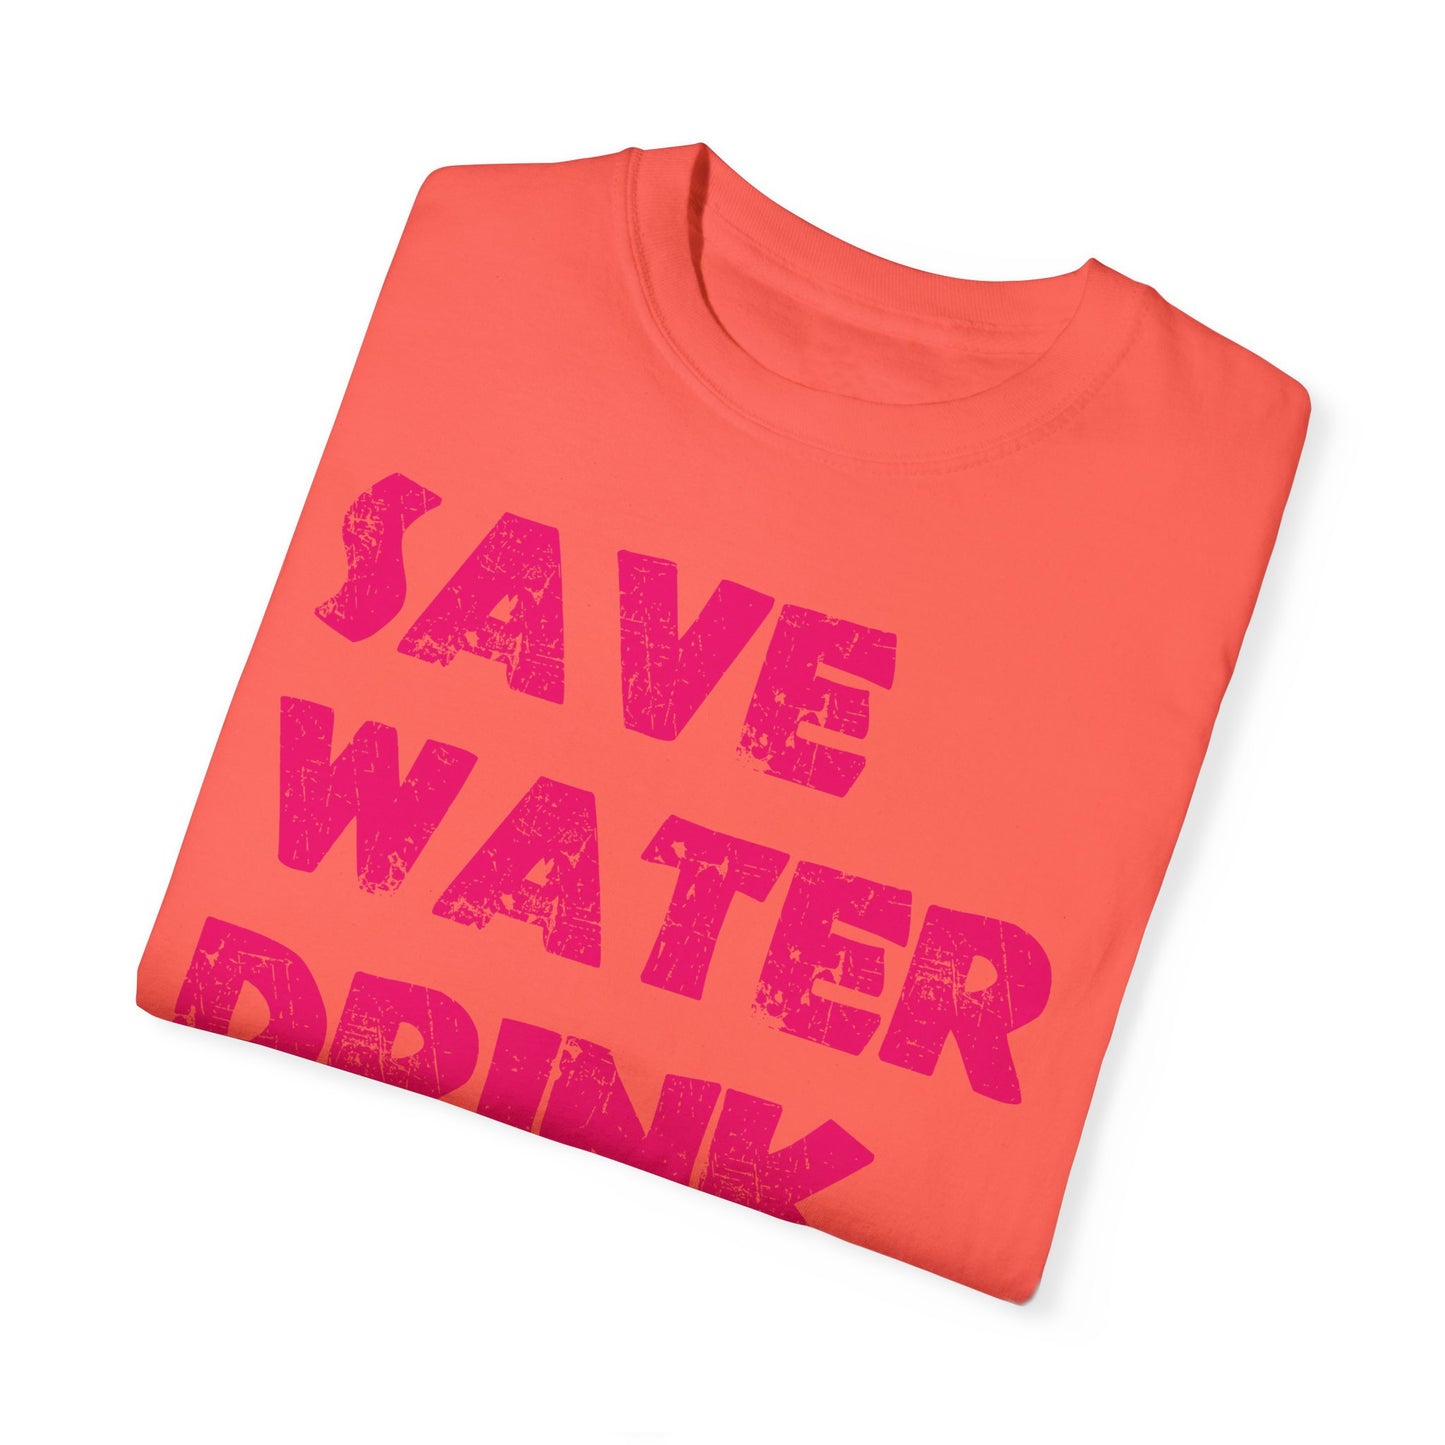 Save Water Drink Margs | Tee